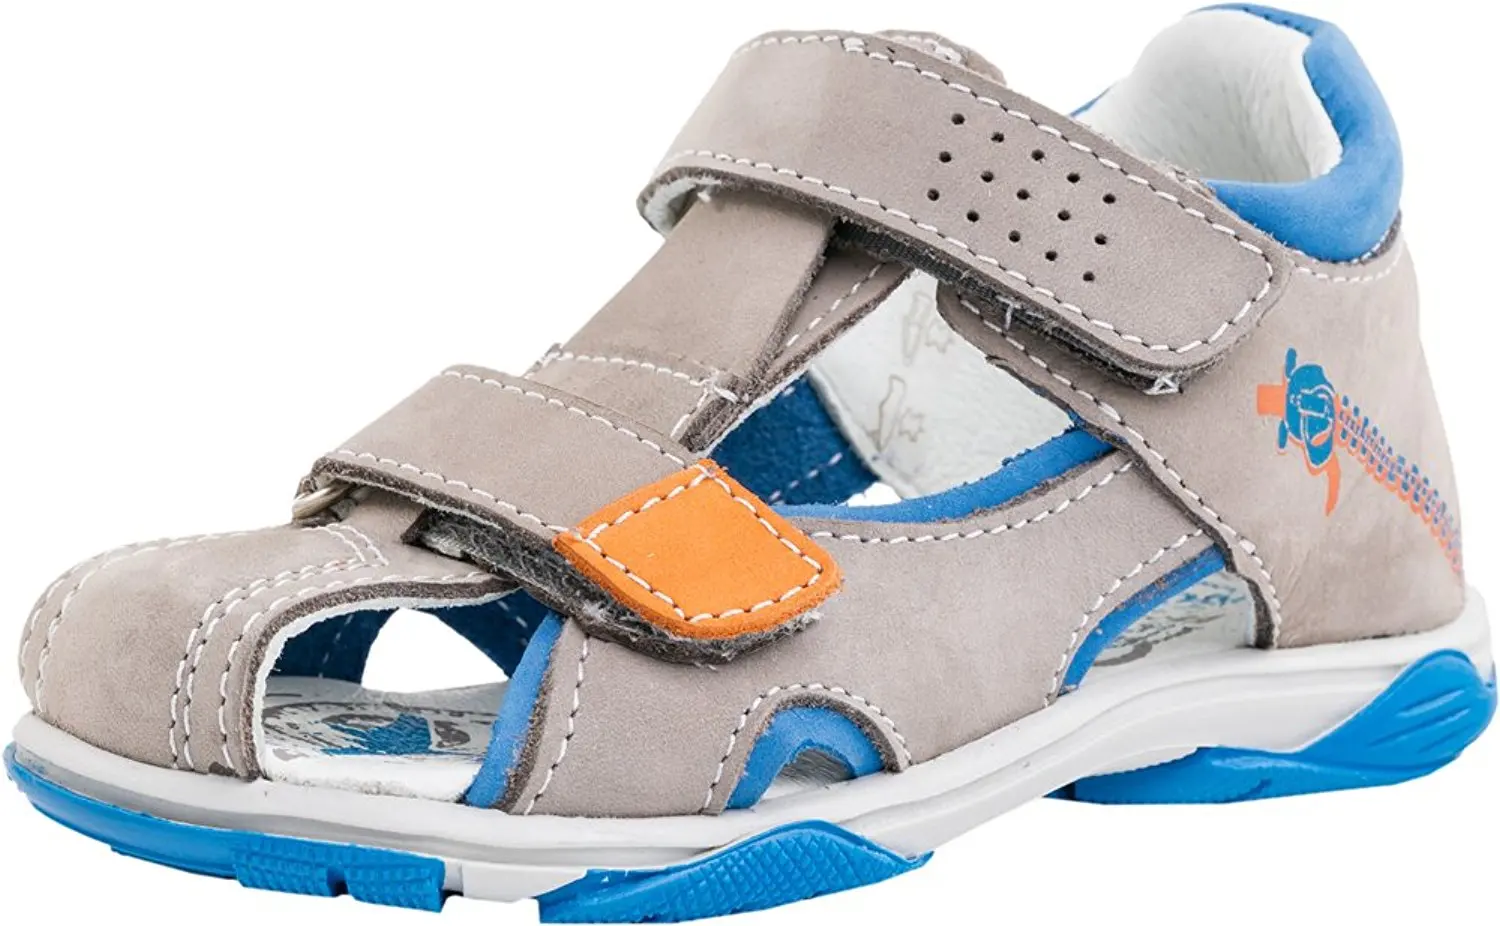 arch support shoes for nurses